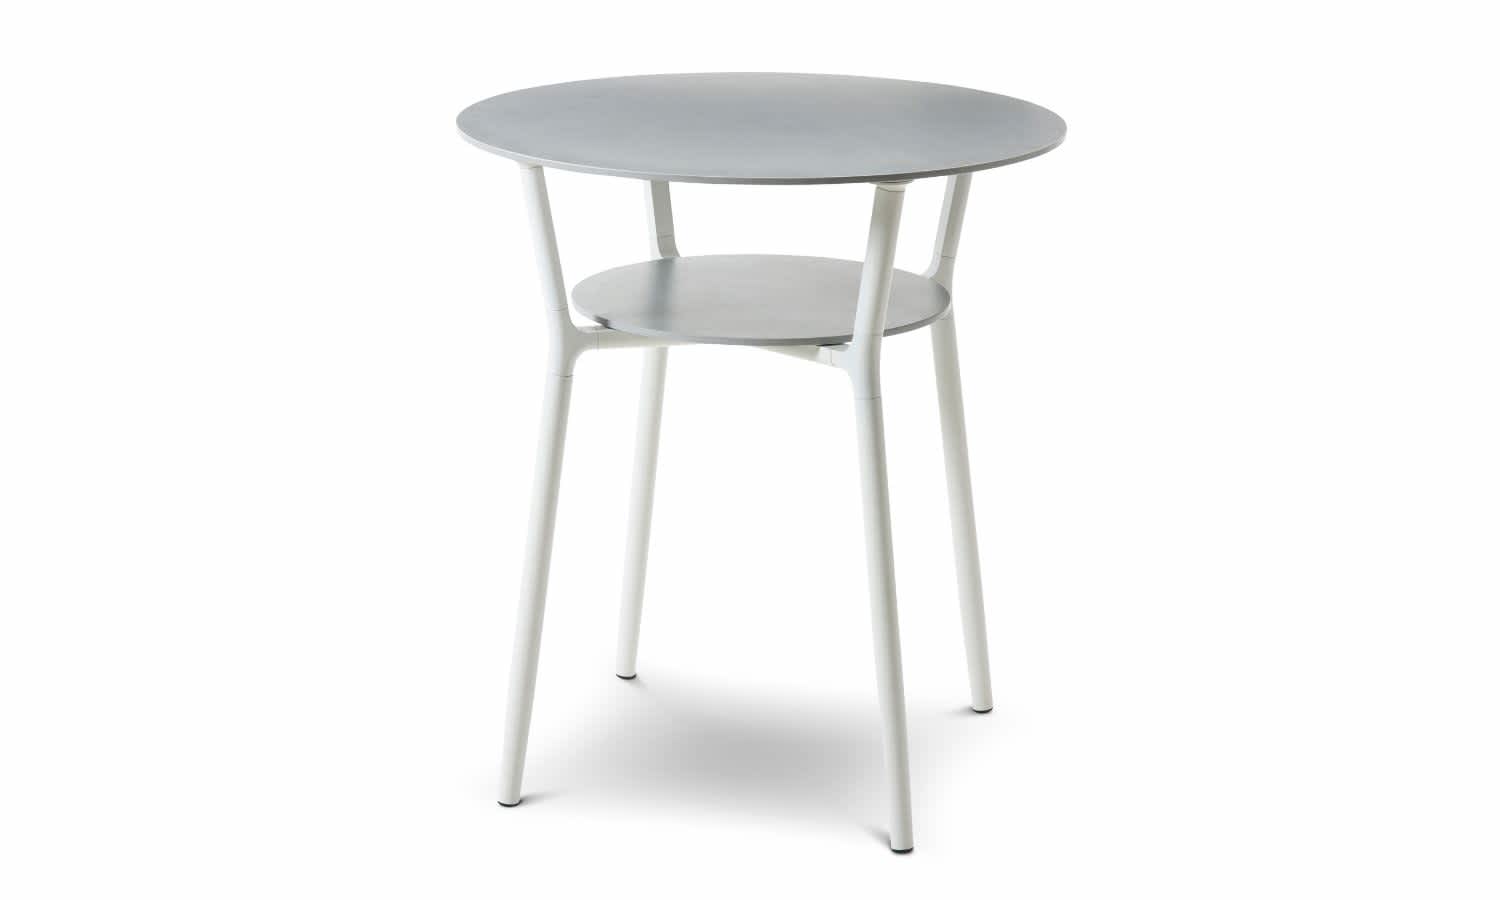 Olive outdor table